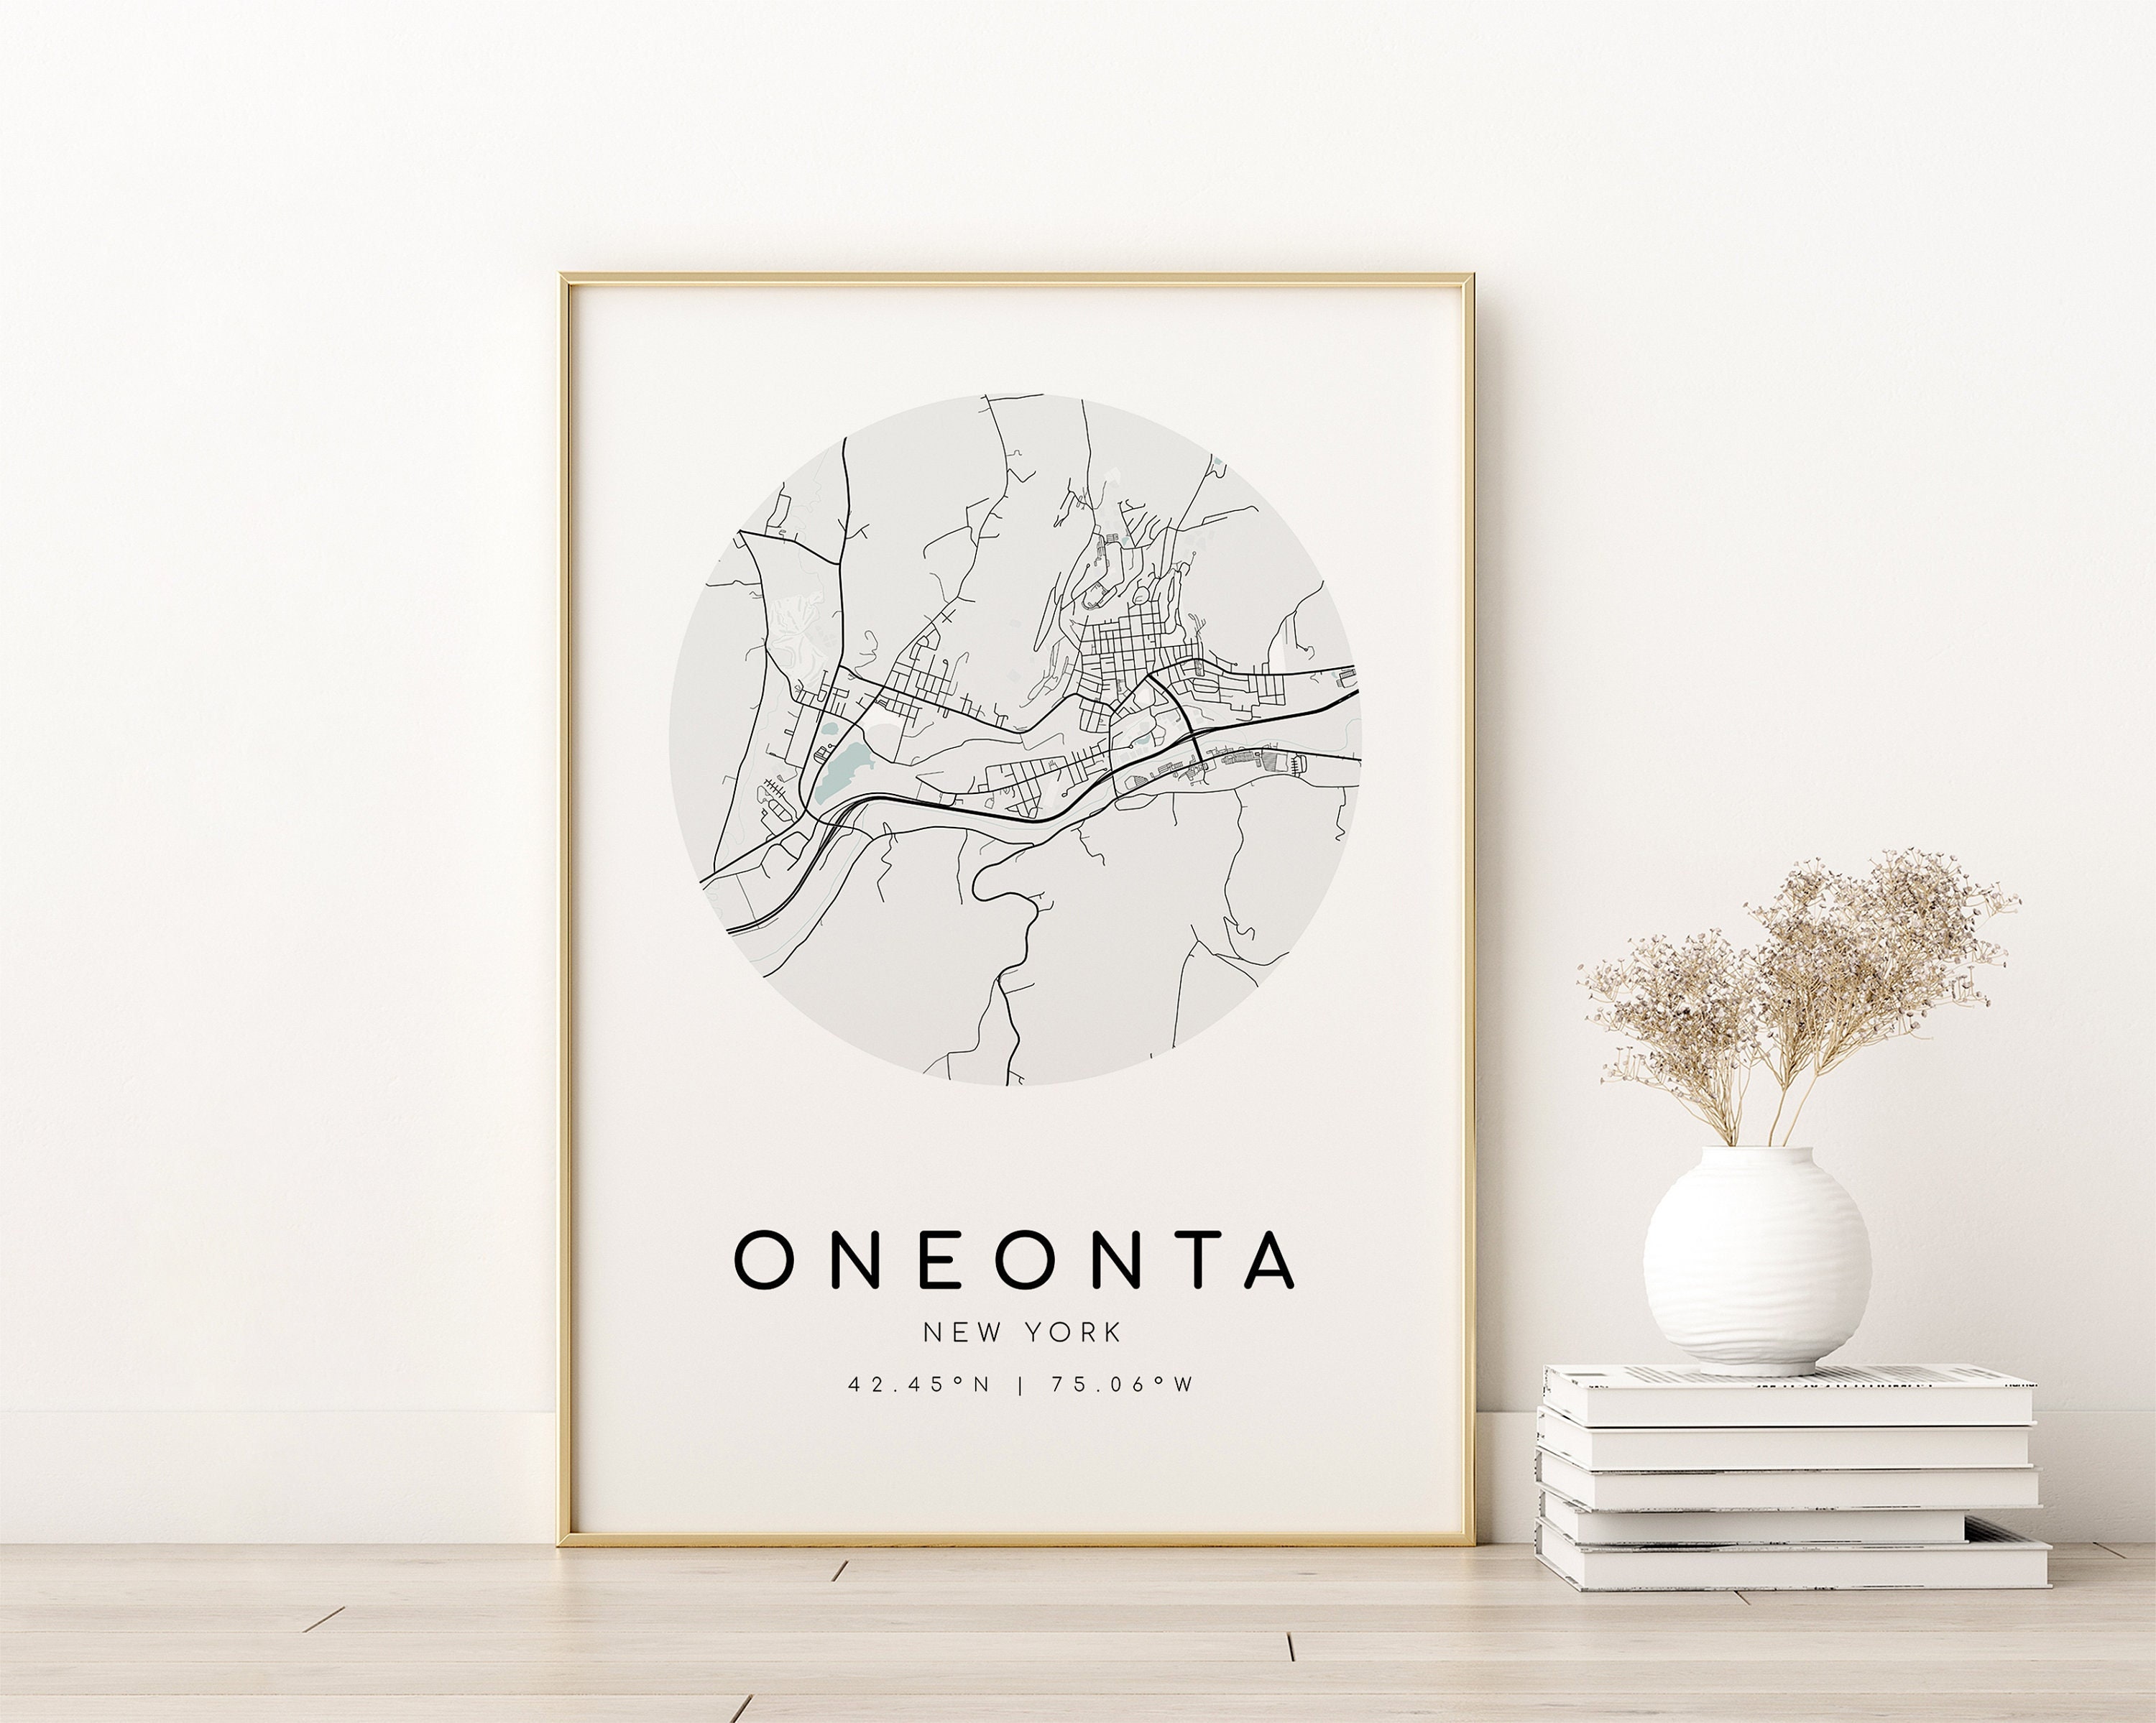 ONEONTA City Map New York NY Personalized Map Print New image pic image